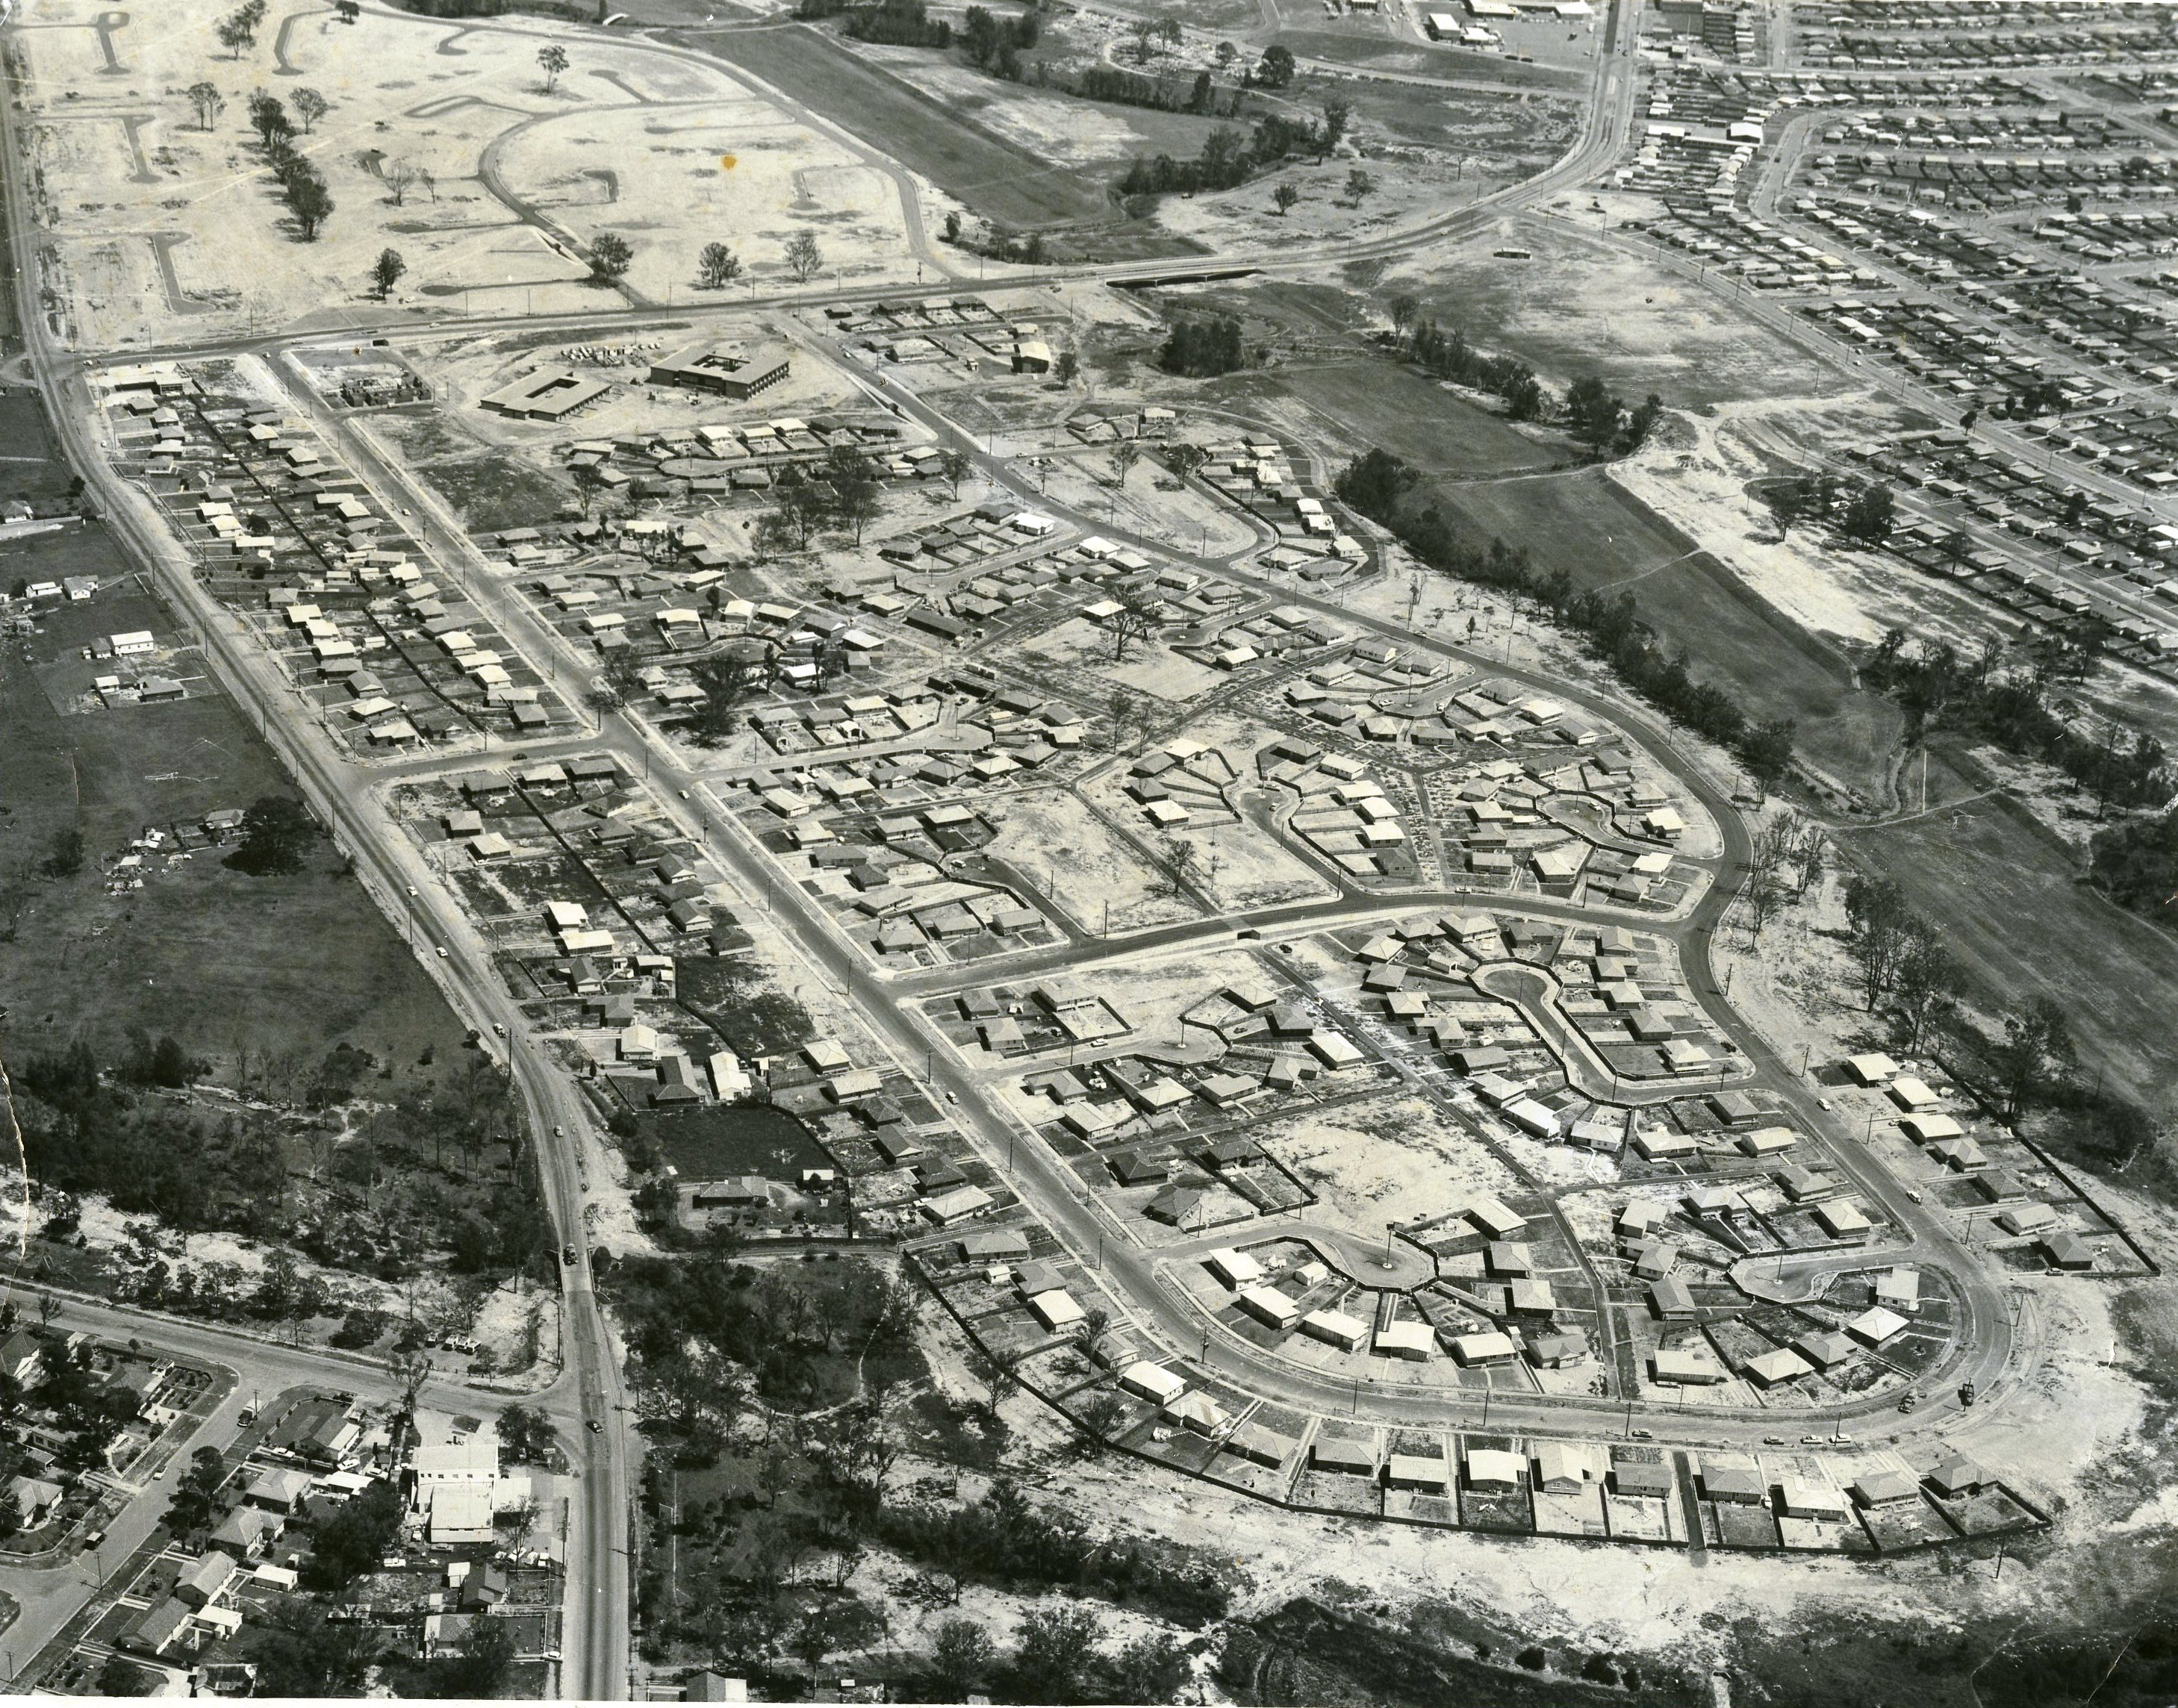 Aerial photograph of Cartwright, Town Planning Department, 1966